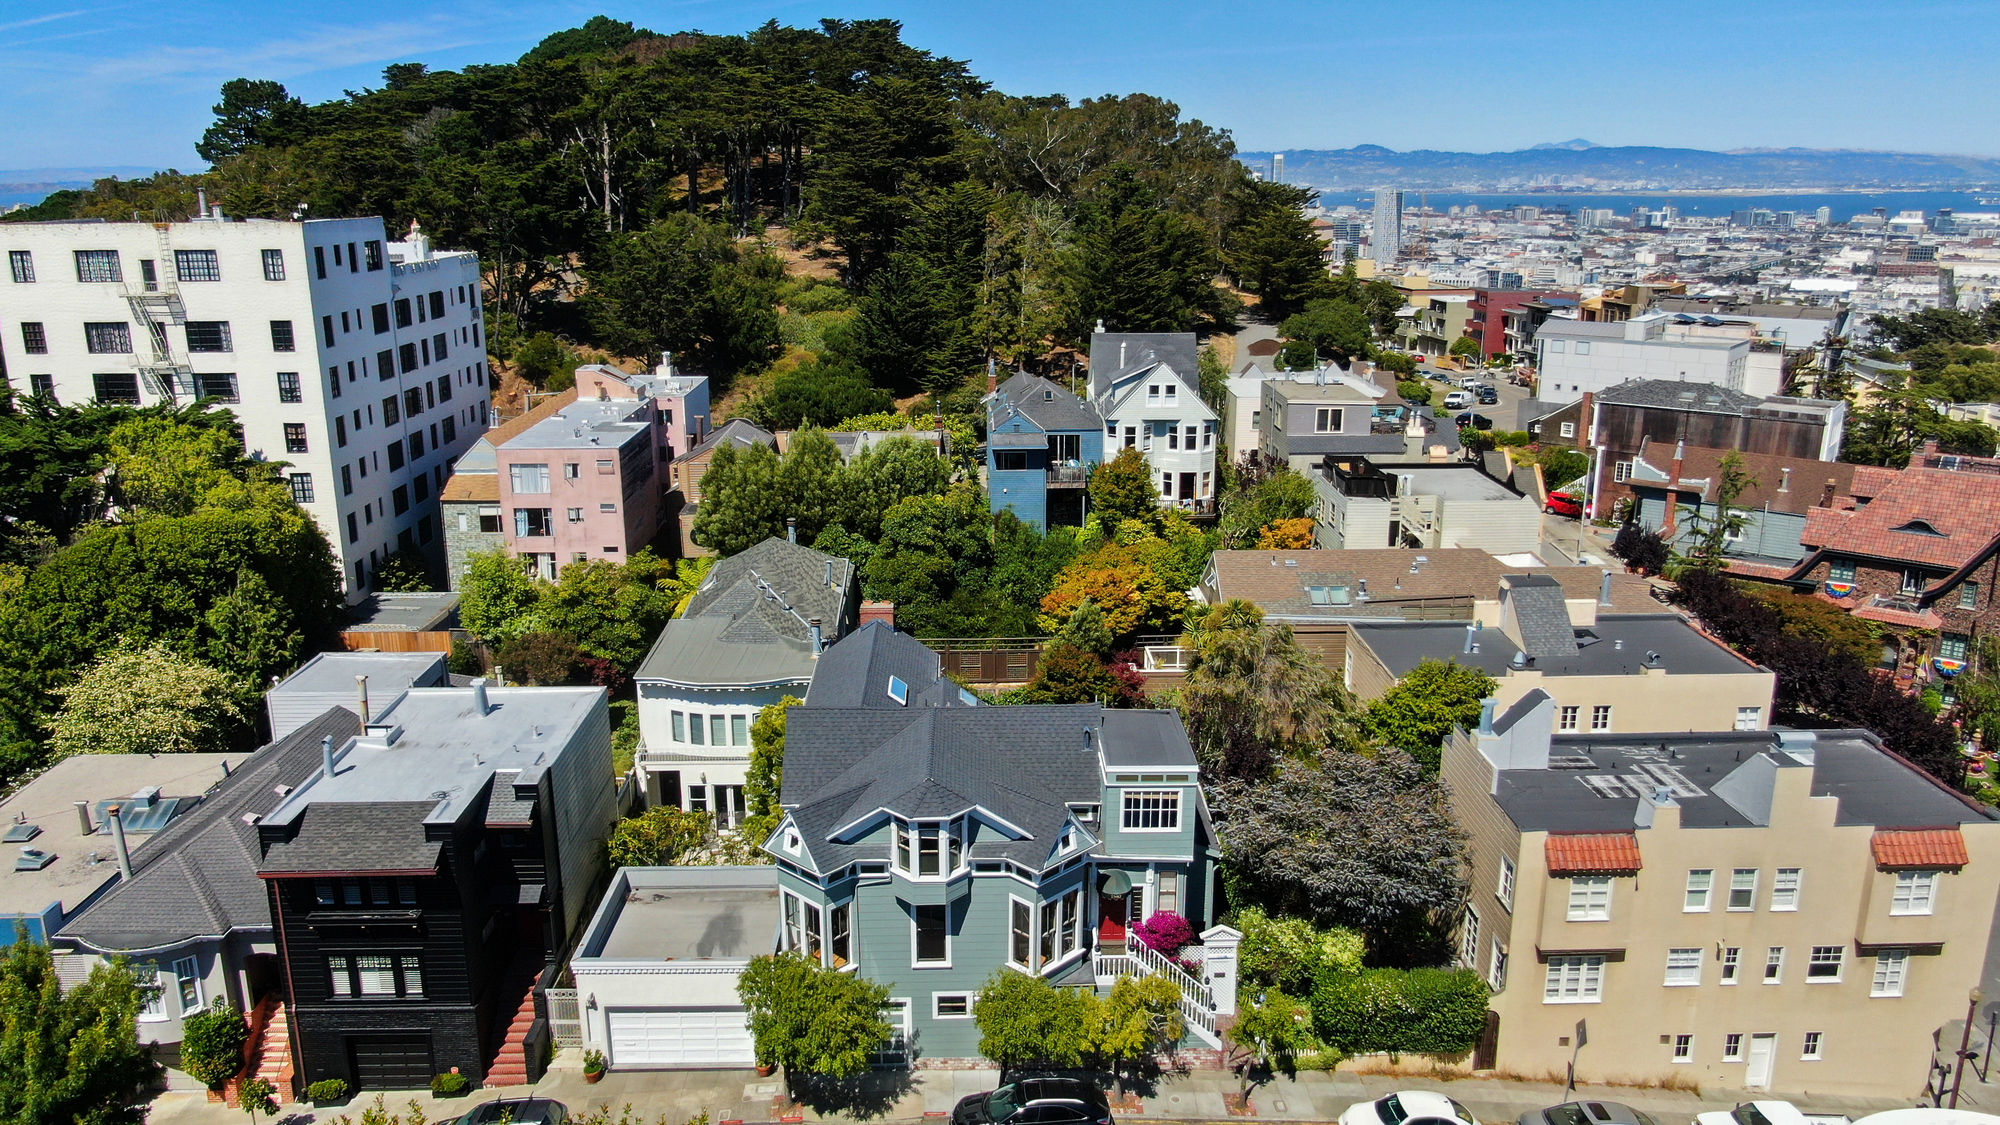 Property Photo: Aerial view of 1580 Masonic, and the close proximity to Buena Vista park